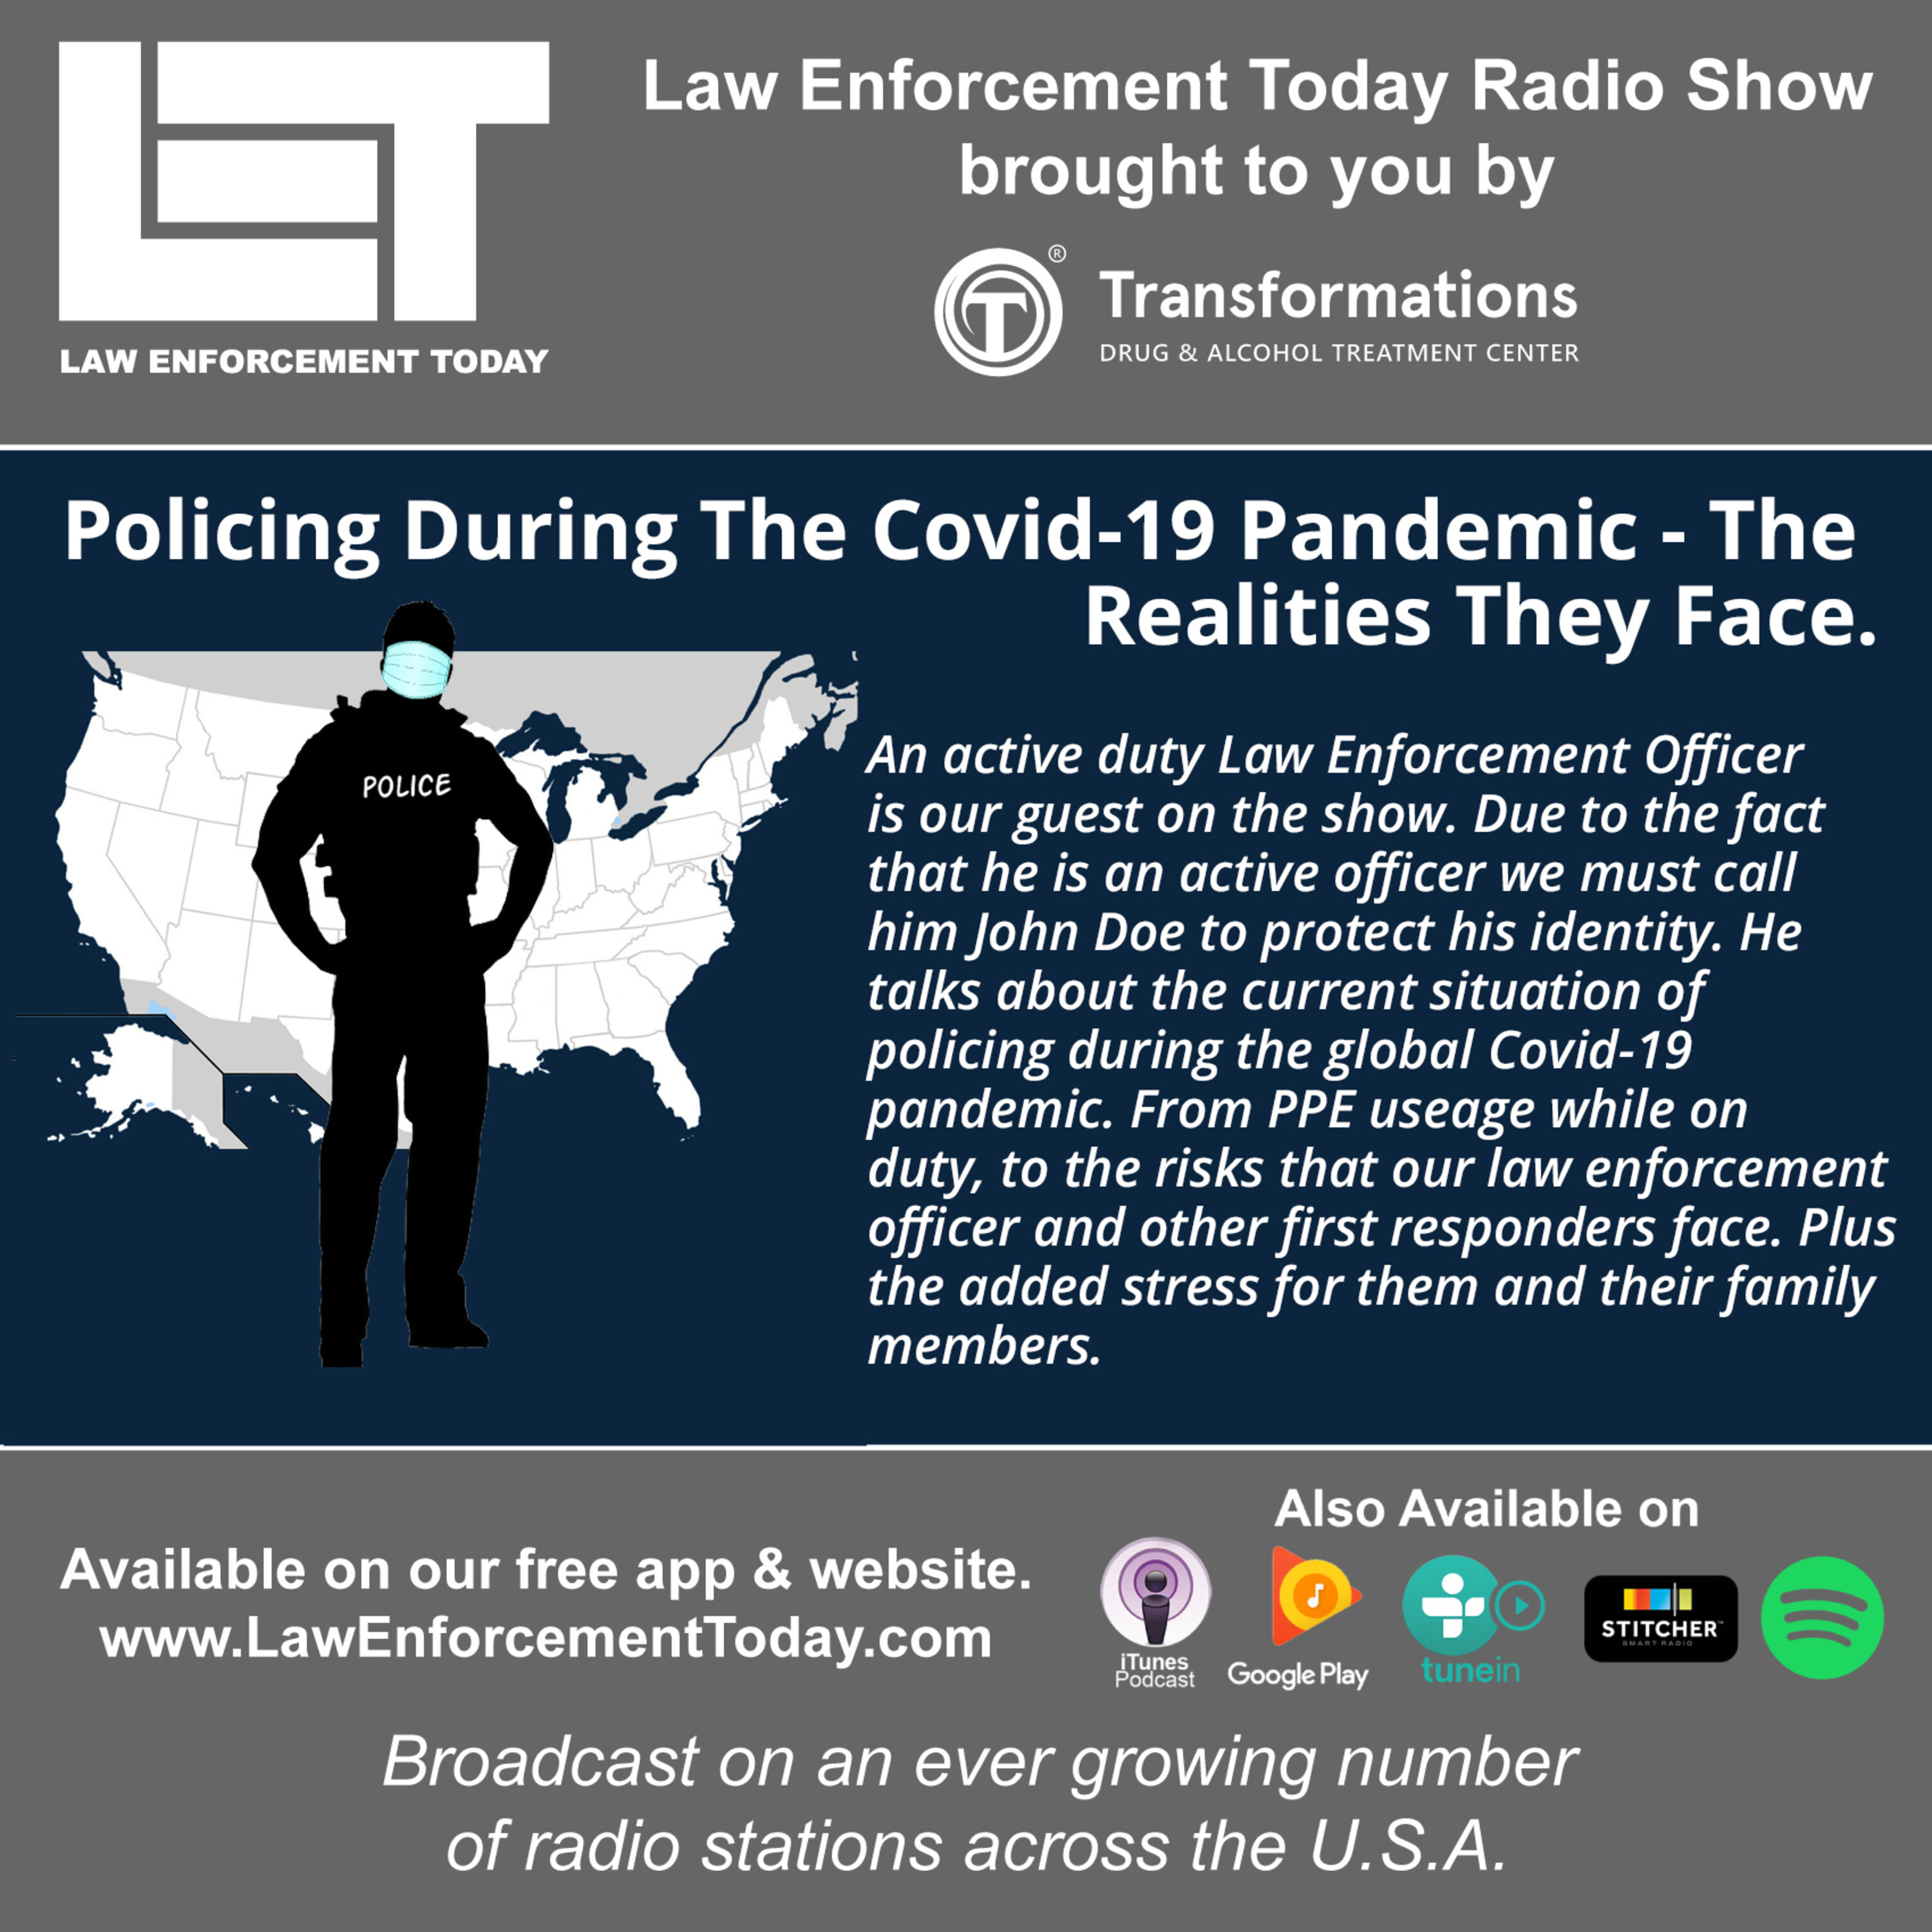 S4E28: Policing During The Covid-19 Pandemic - The Realities They Face.